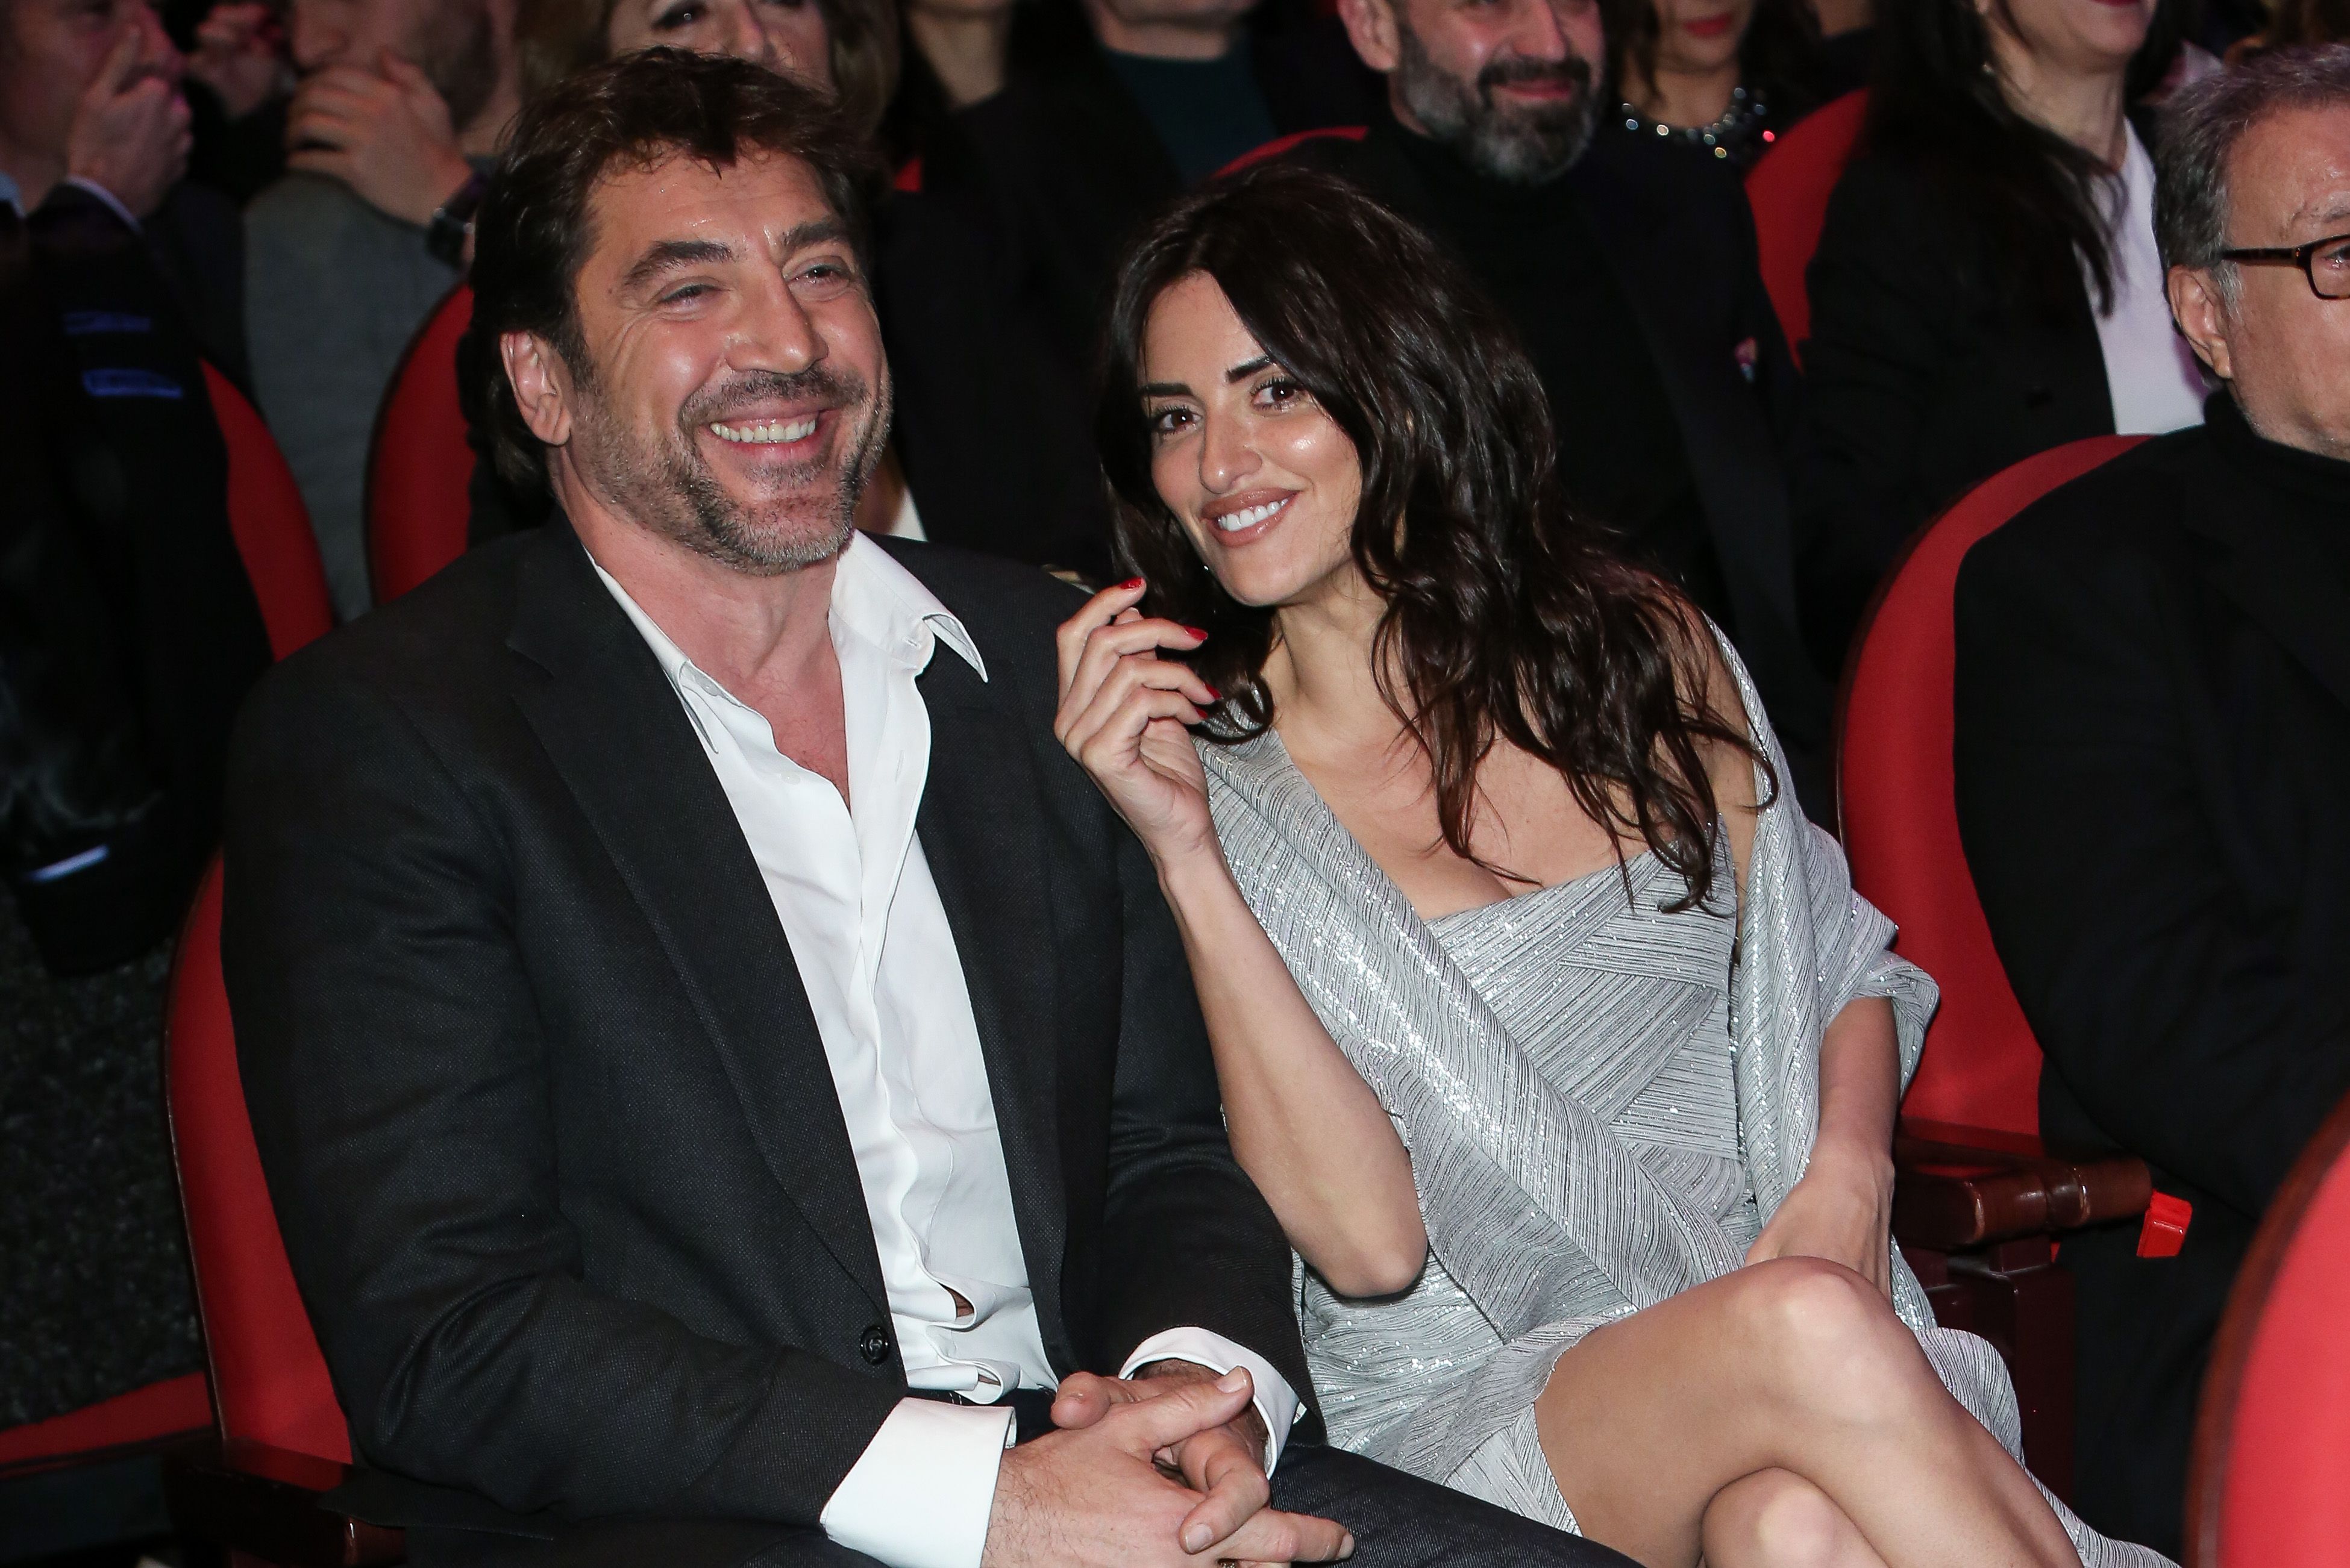 Javier Bardem and Penelope Cruz at the 'Union de Actores' awards gala in 2018 in Madrid, Spain | Source: Getty Images